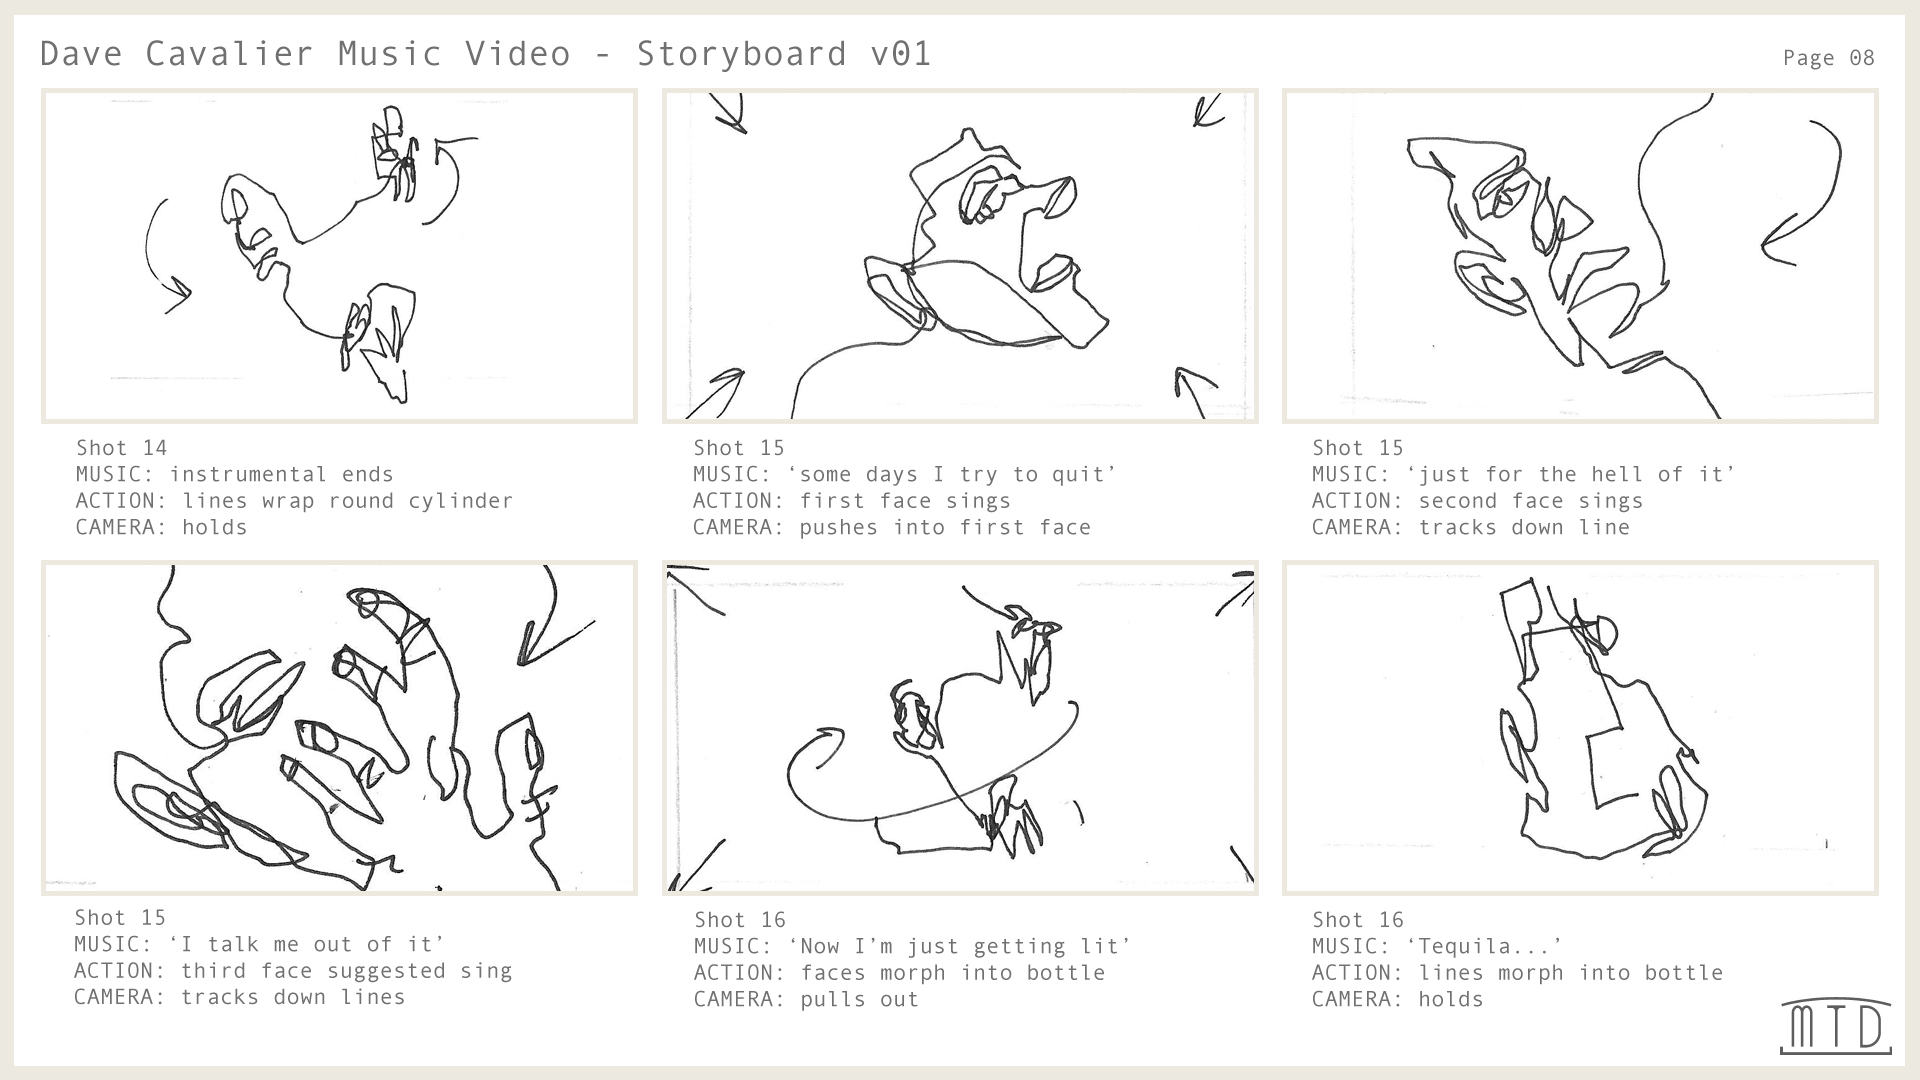 The Hold storyboard page 8